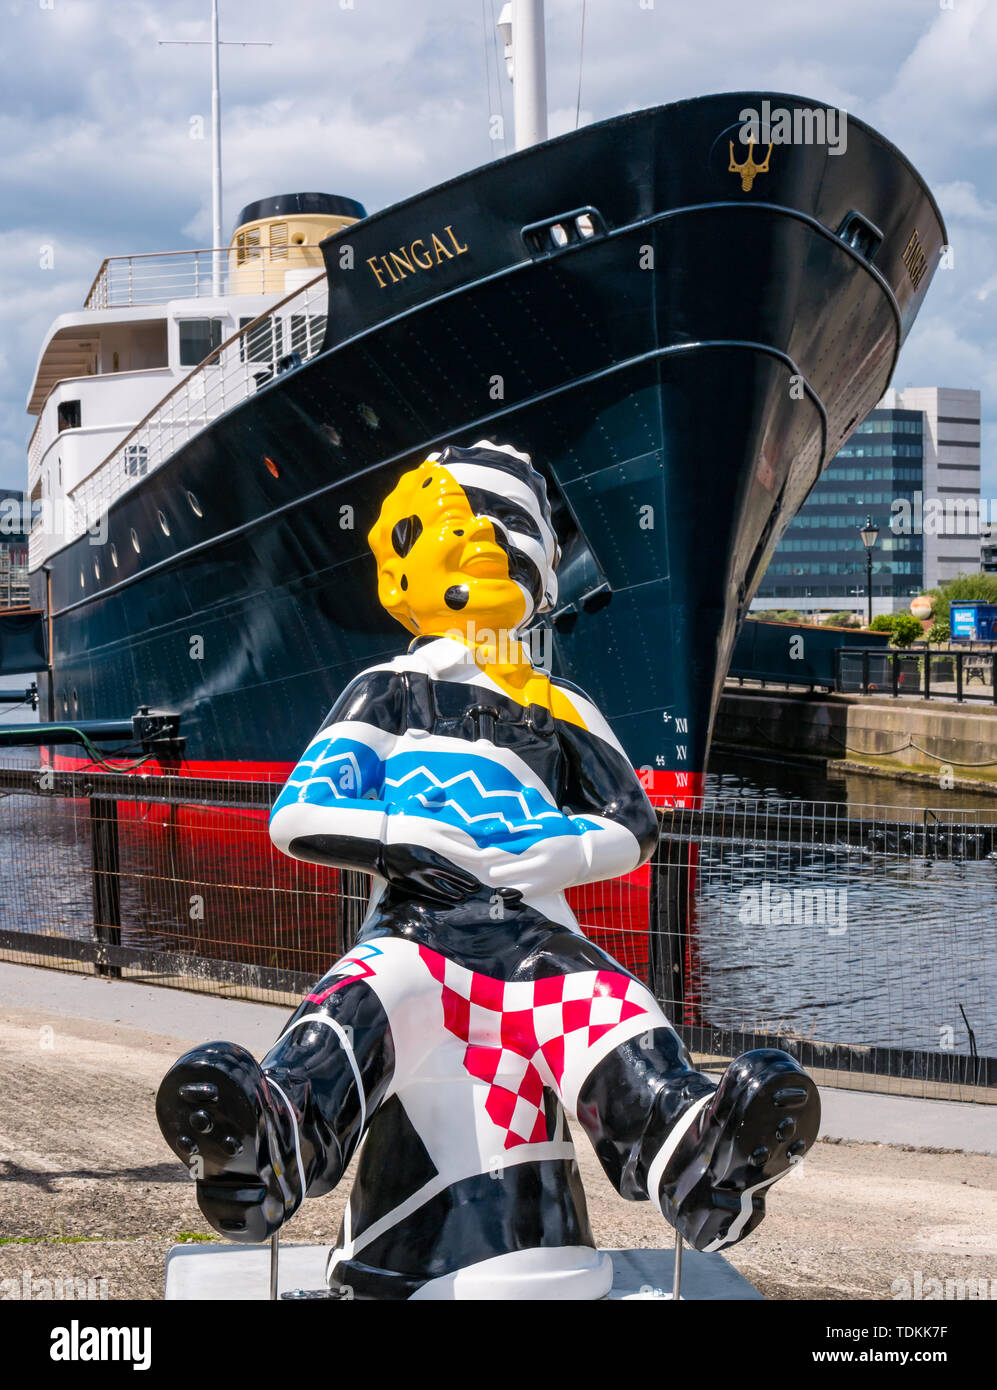 Leith, Edinburgh, Scotland, United Kingdom, 17 June 2019. Oor Wullie's Big Bucket Trail: An art trail of 200 Oor Wullie sculptures appear in Scottish cities in a mass arts event that lasts until August 30th. Oor Wullie is an iconic Scottish cartoon character from the Sunday Post newspaper. The sculptures will be auctioned to raise money for Scotland’s children’s charities There are 5 in the Leith area, and 60 in Edinburgh altogether. Bobby Dazzler by Scott Dawson and Rachel Miller in Alexandra Dock next to Fingal Edinburgh luxury floating hotel Stock Photo